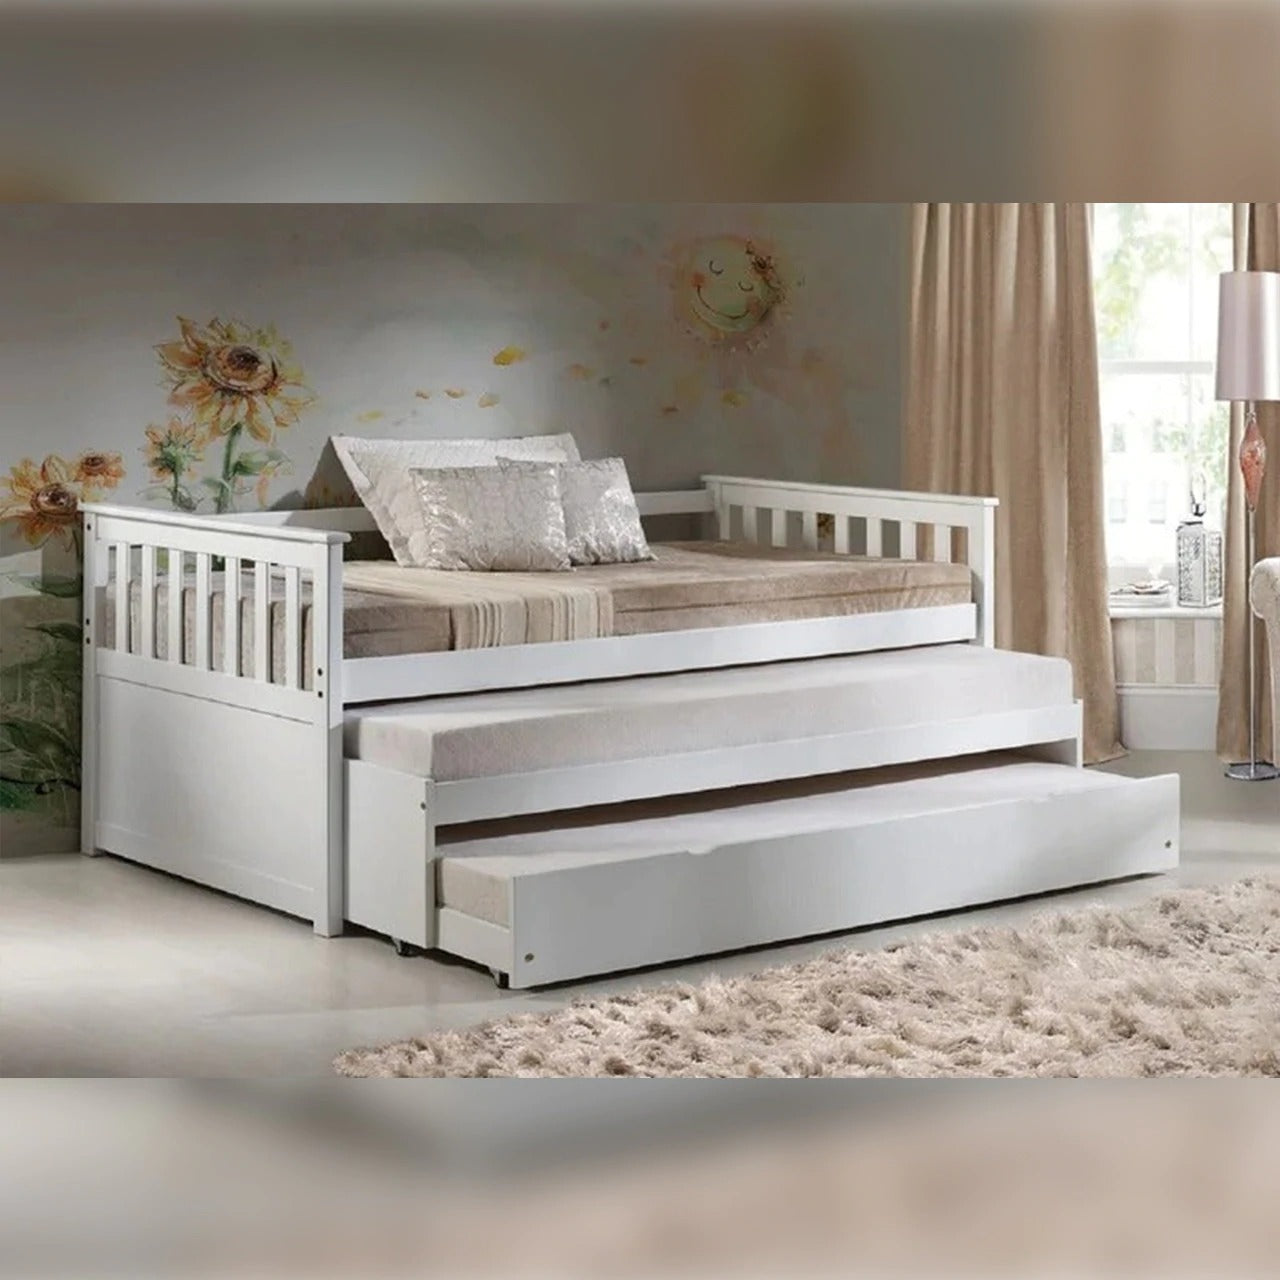 Trundle Bed, Trundle, Pull Out Bed, Rolling Bed, Trundle Bed With Storage